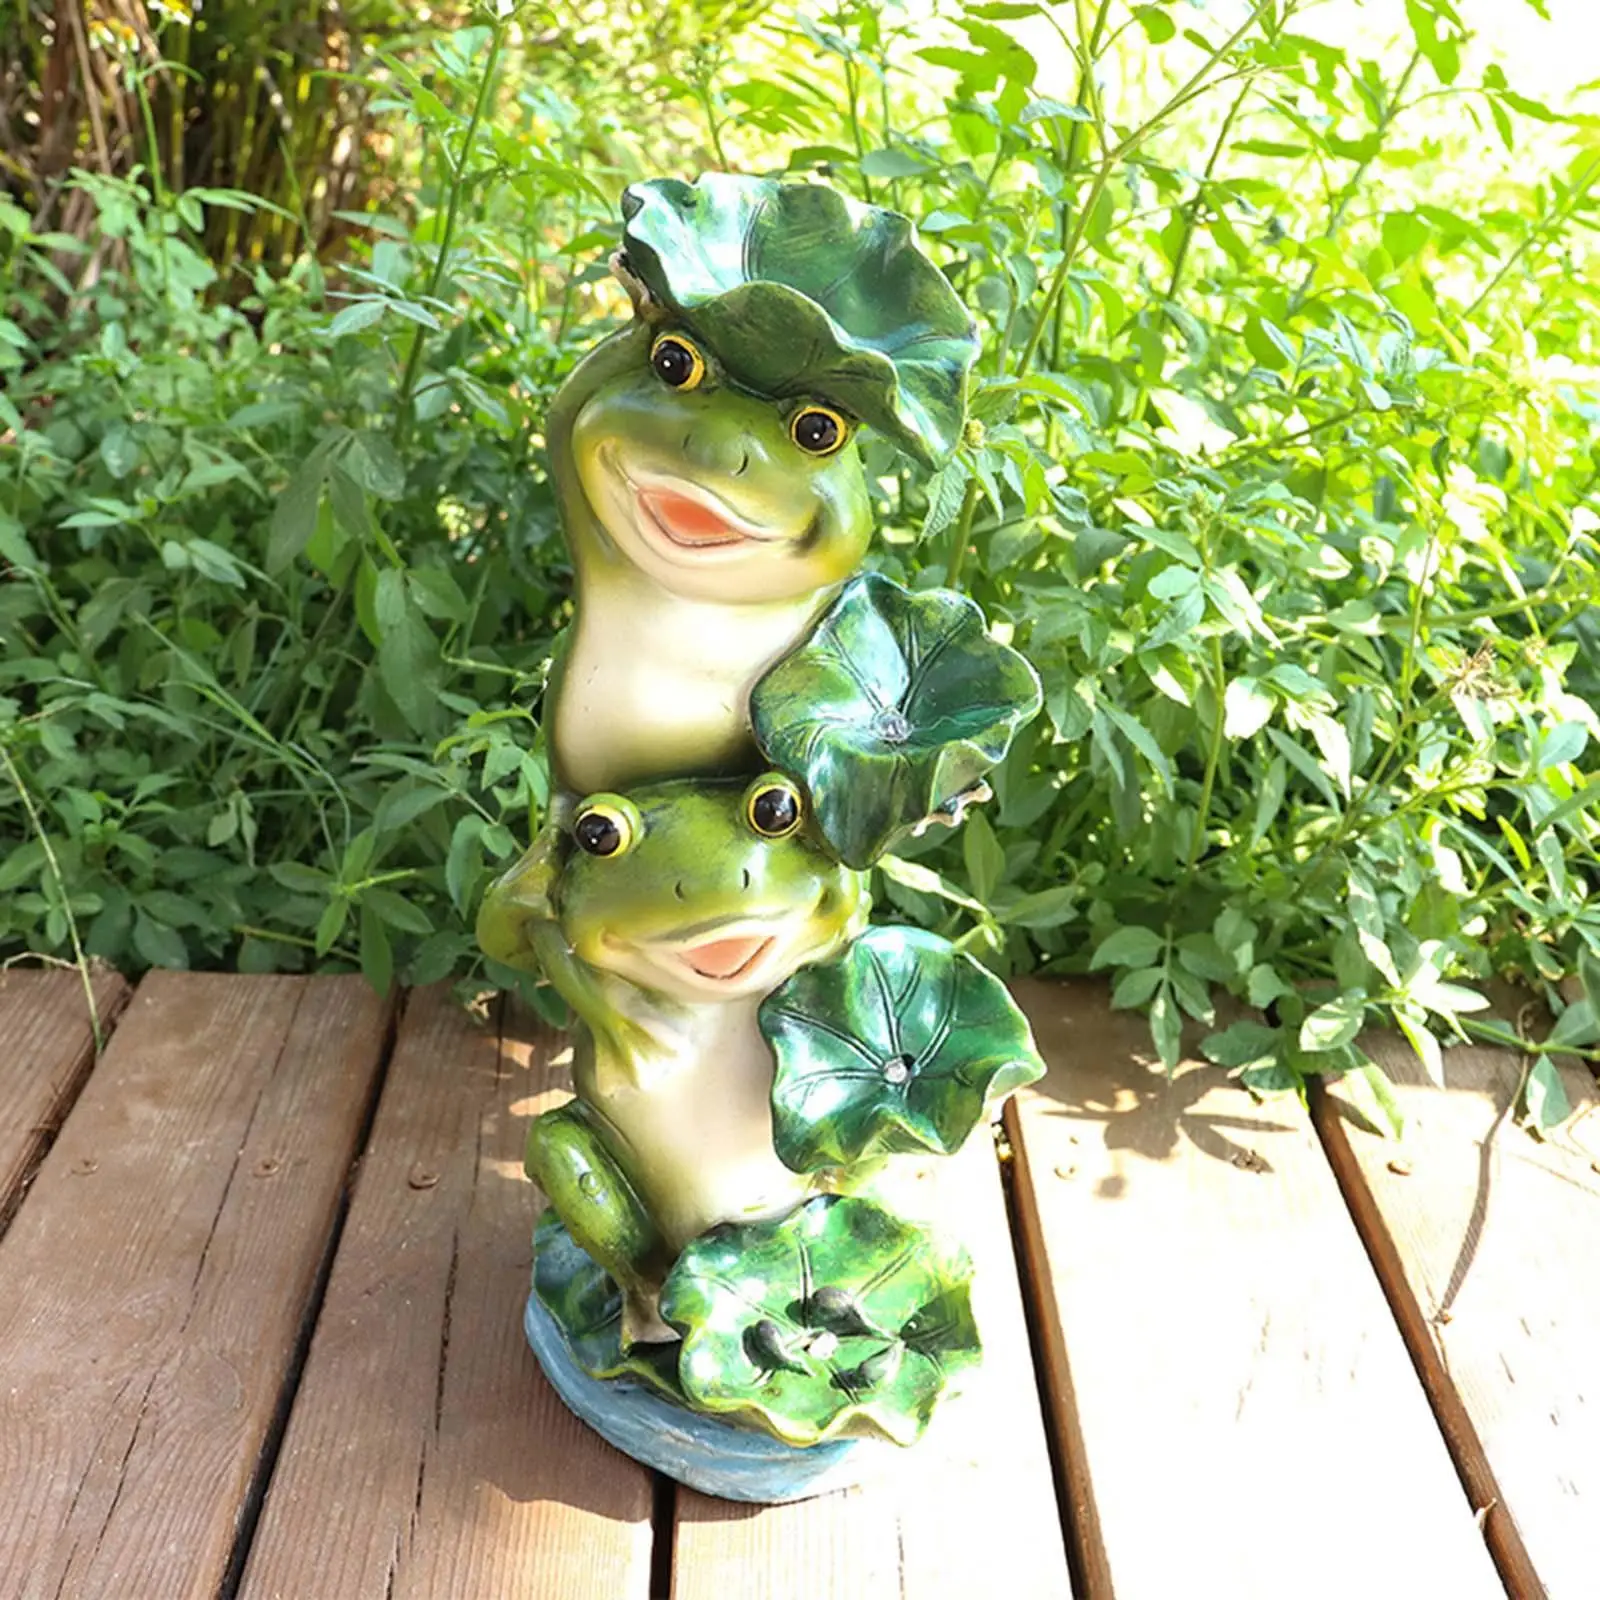 Outdoor Solar Powered Garden Lantern Frog Figure Garden Ornament Frogs Statue with Light for Yard Pathway Party Lawn Decor